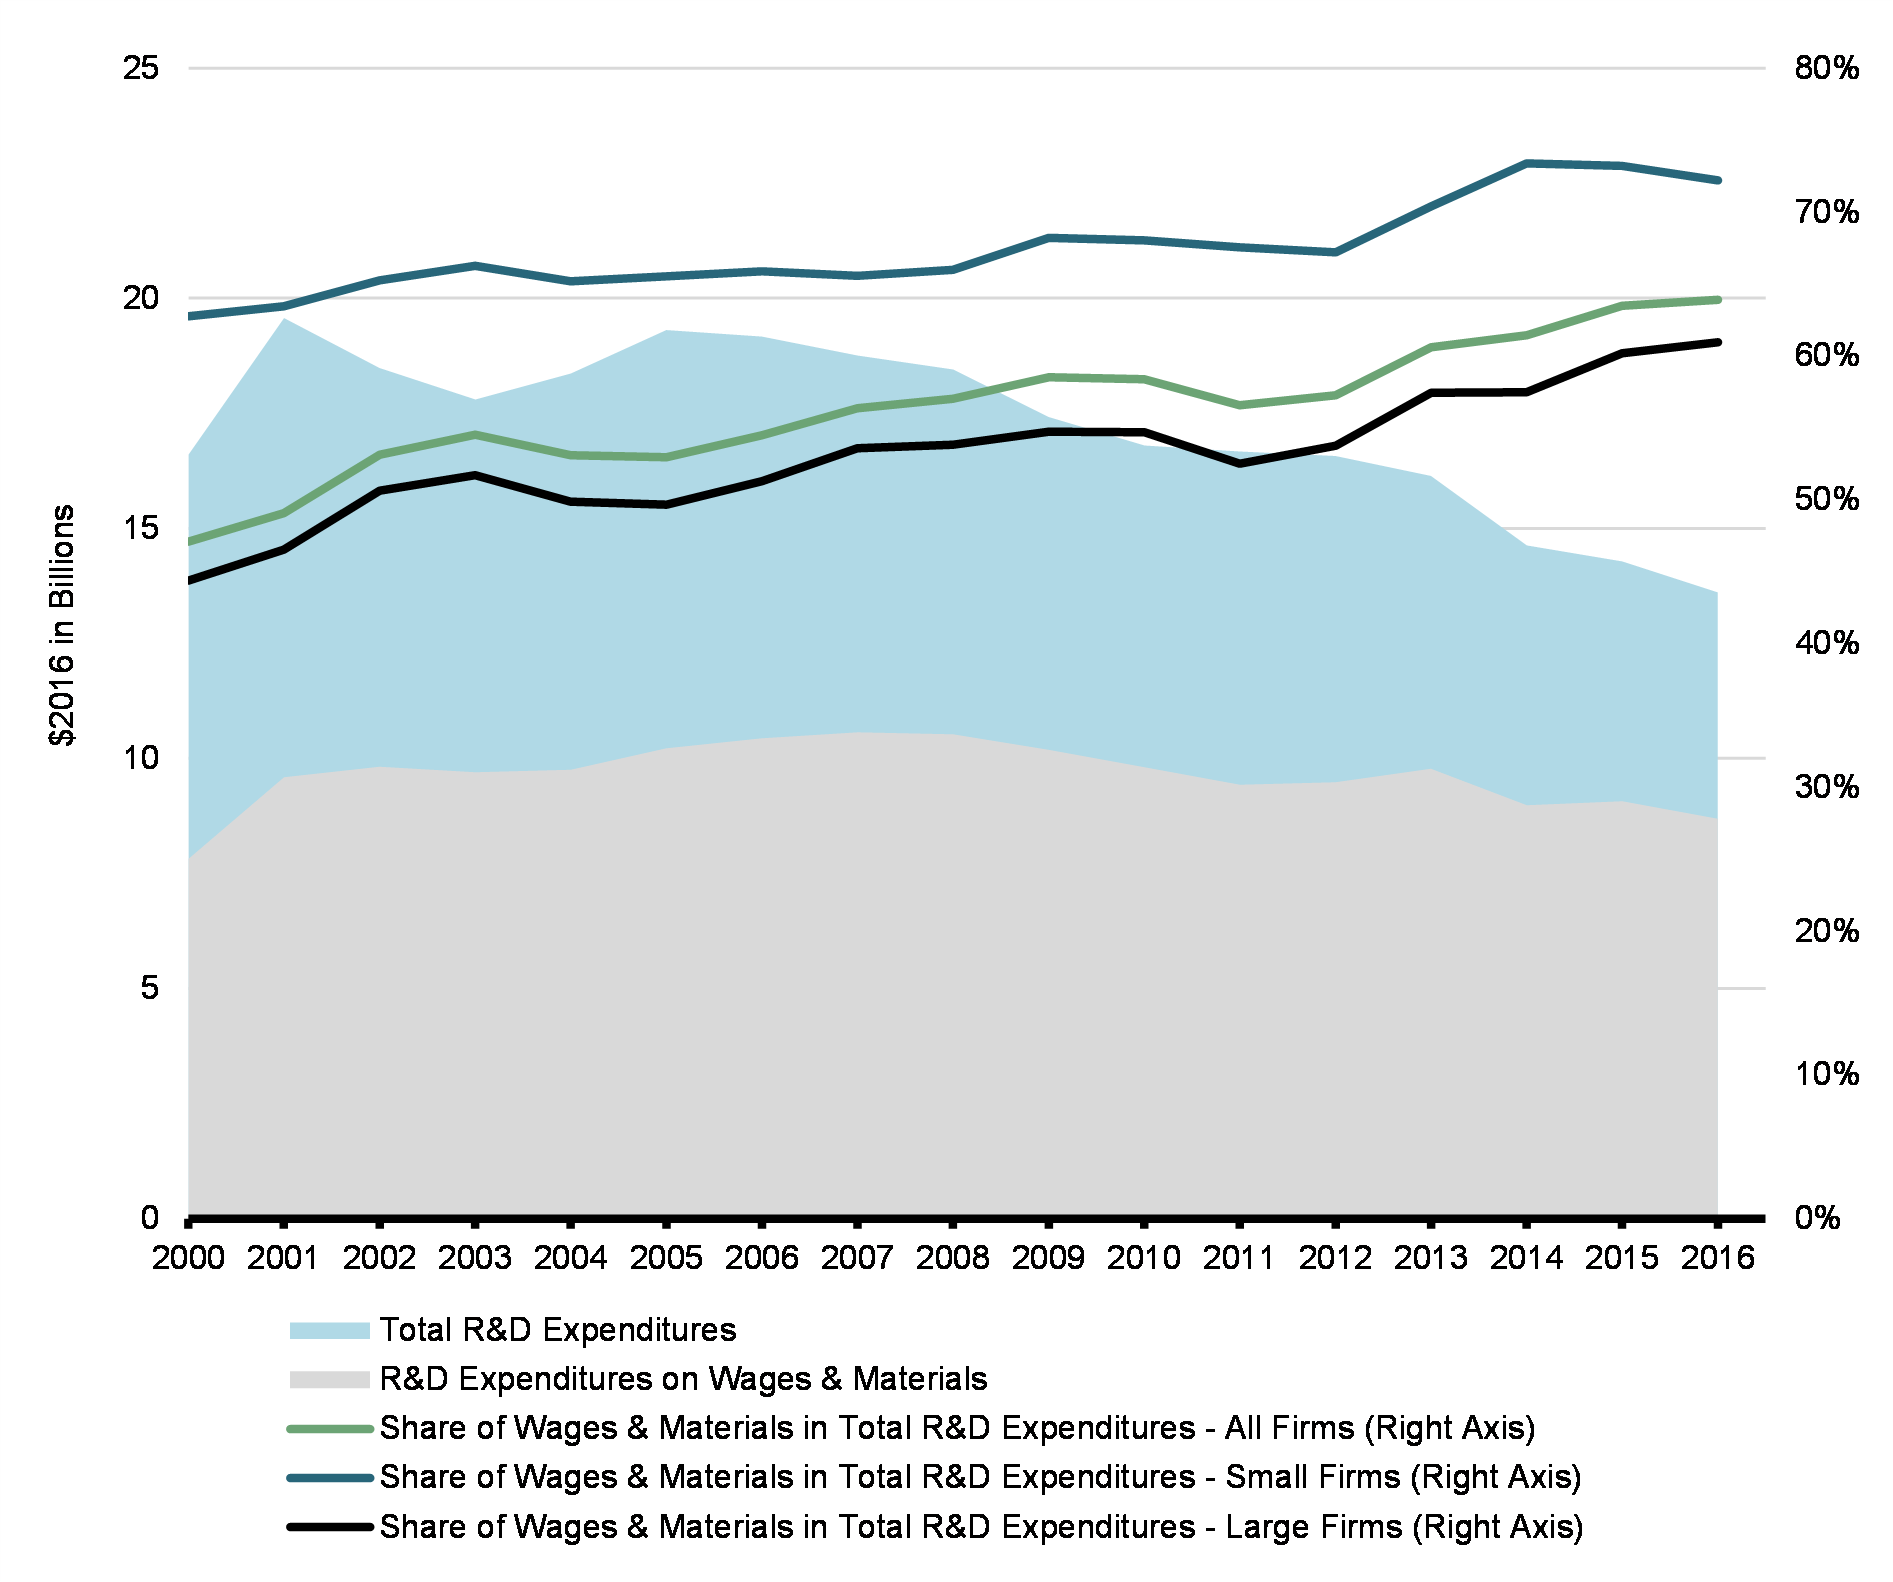 Chart 6: SR&ED Expenditures on Wages and Materials, 2000-2016